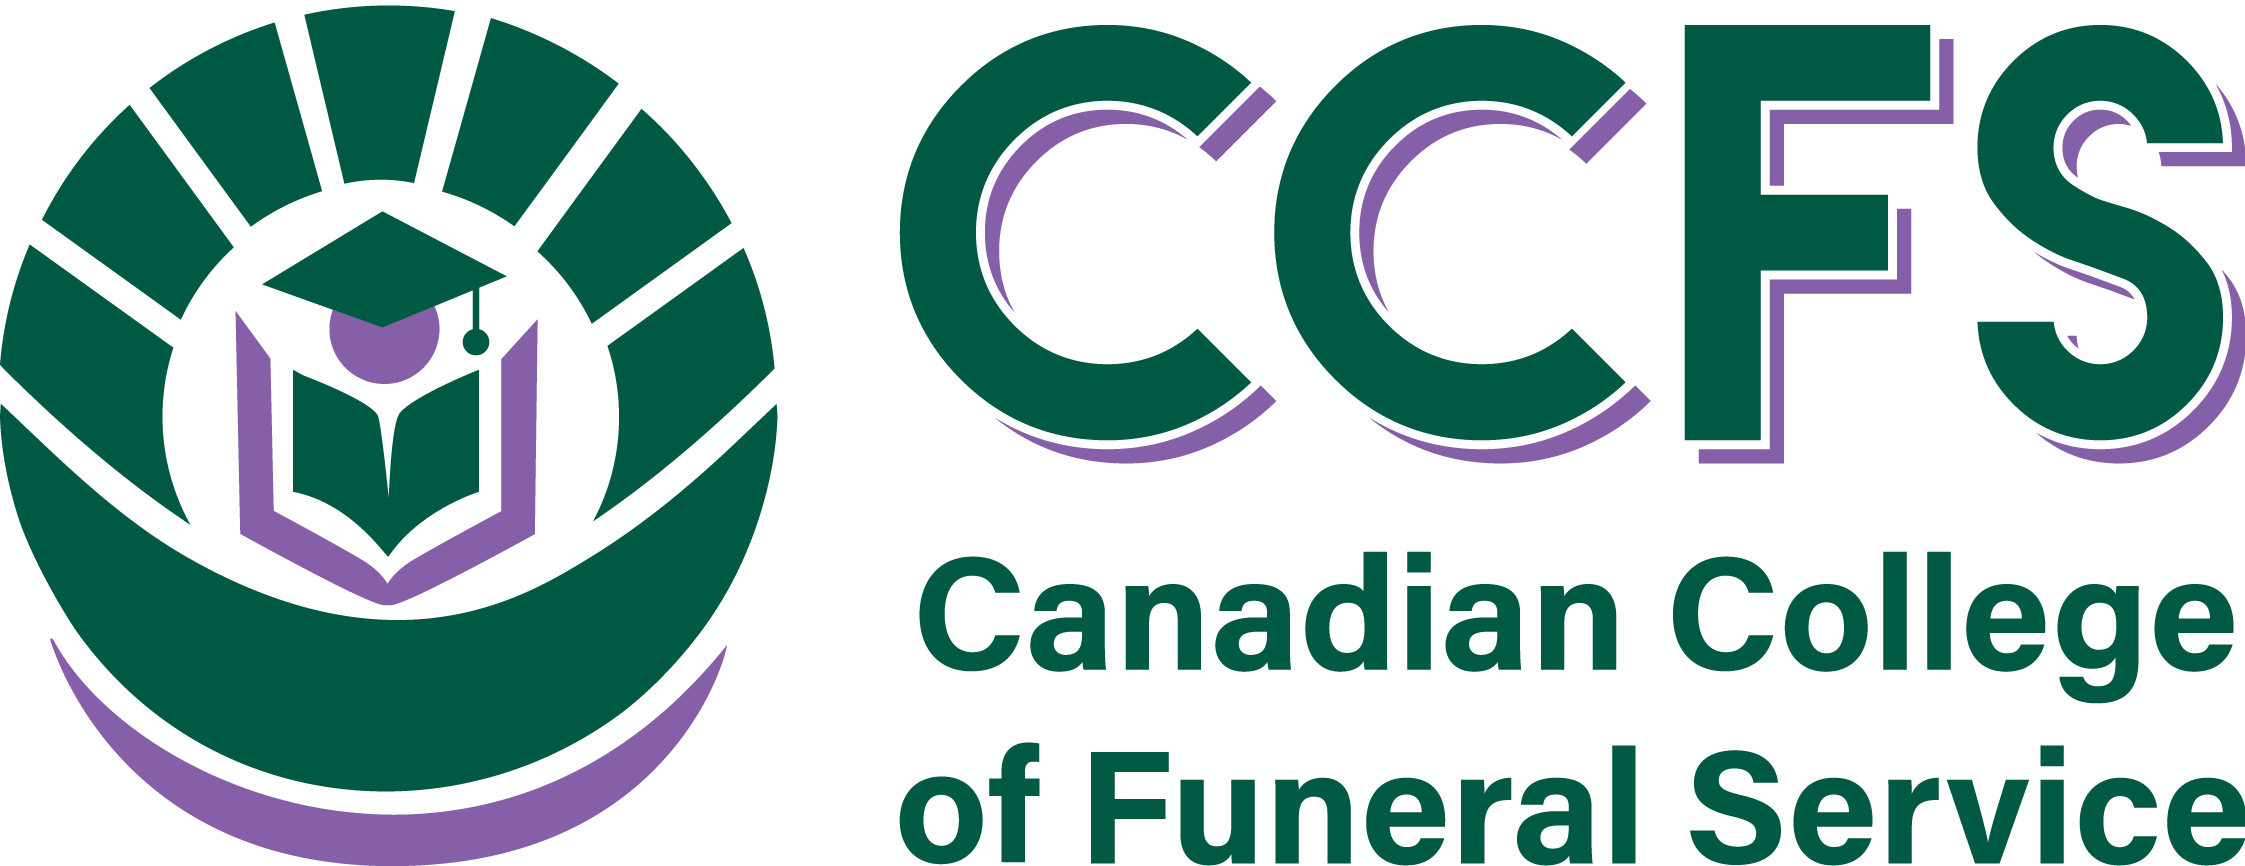 Canadian College of Funeral Service